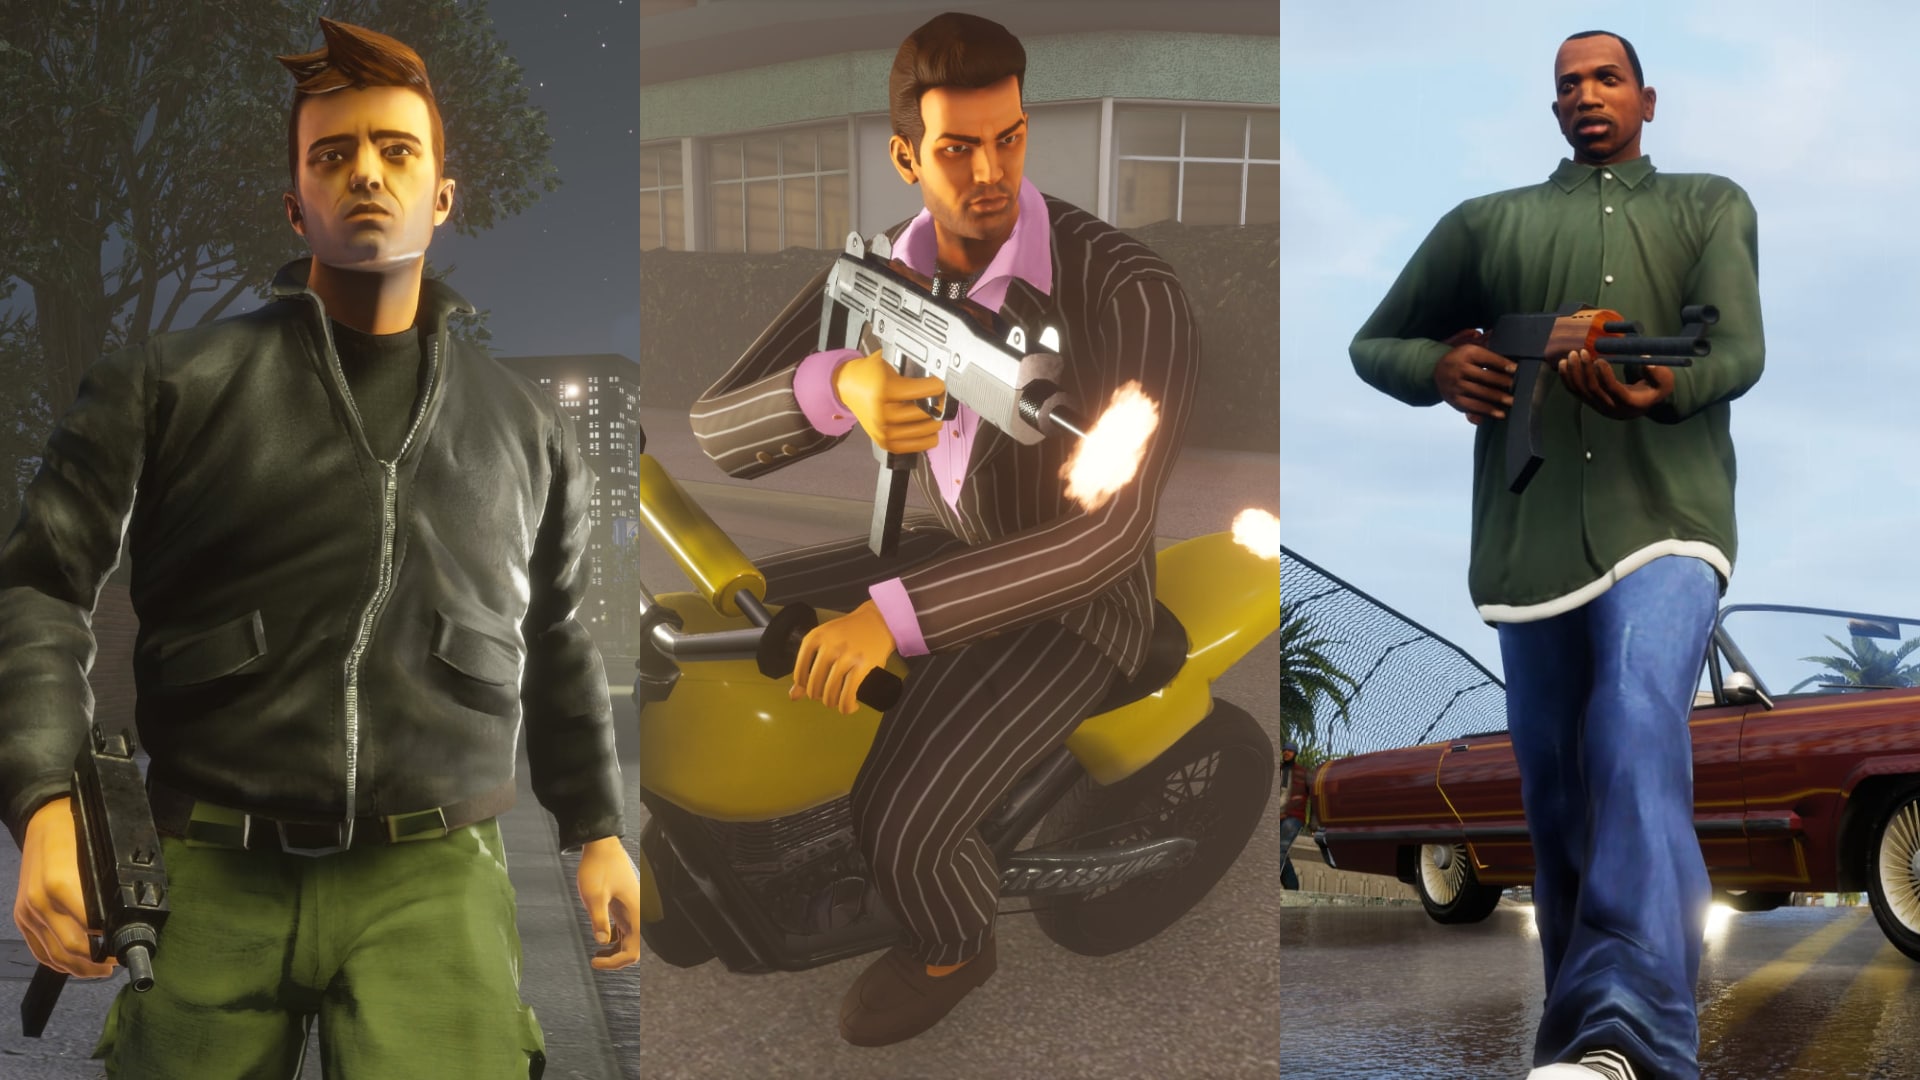 Netflix launches classic Grand Theft Auto games for subscribers